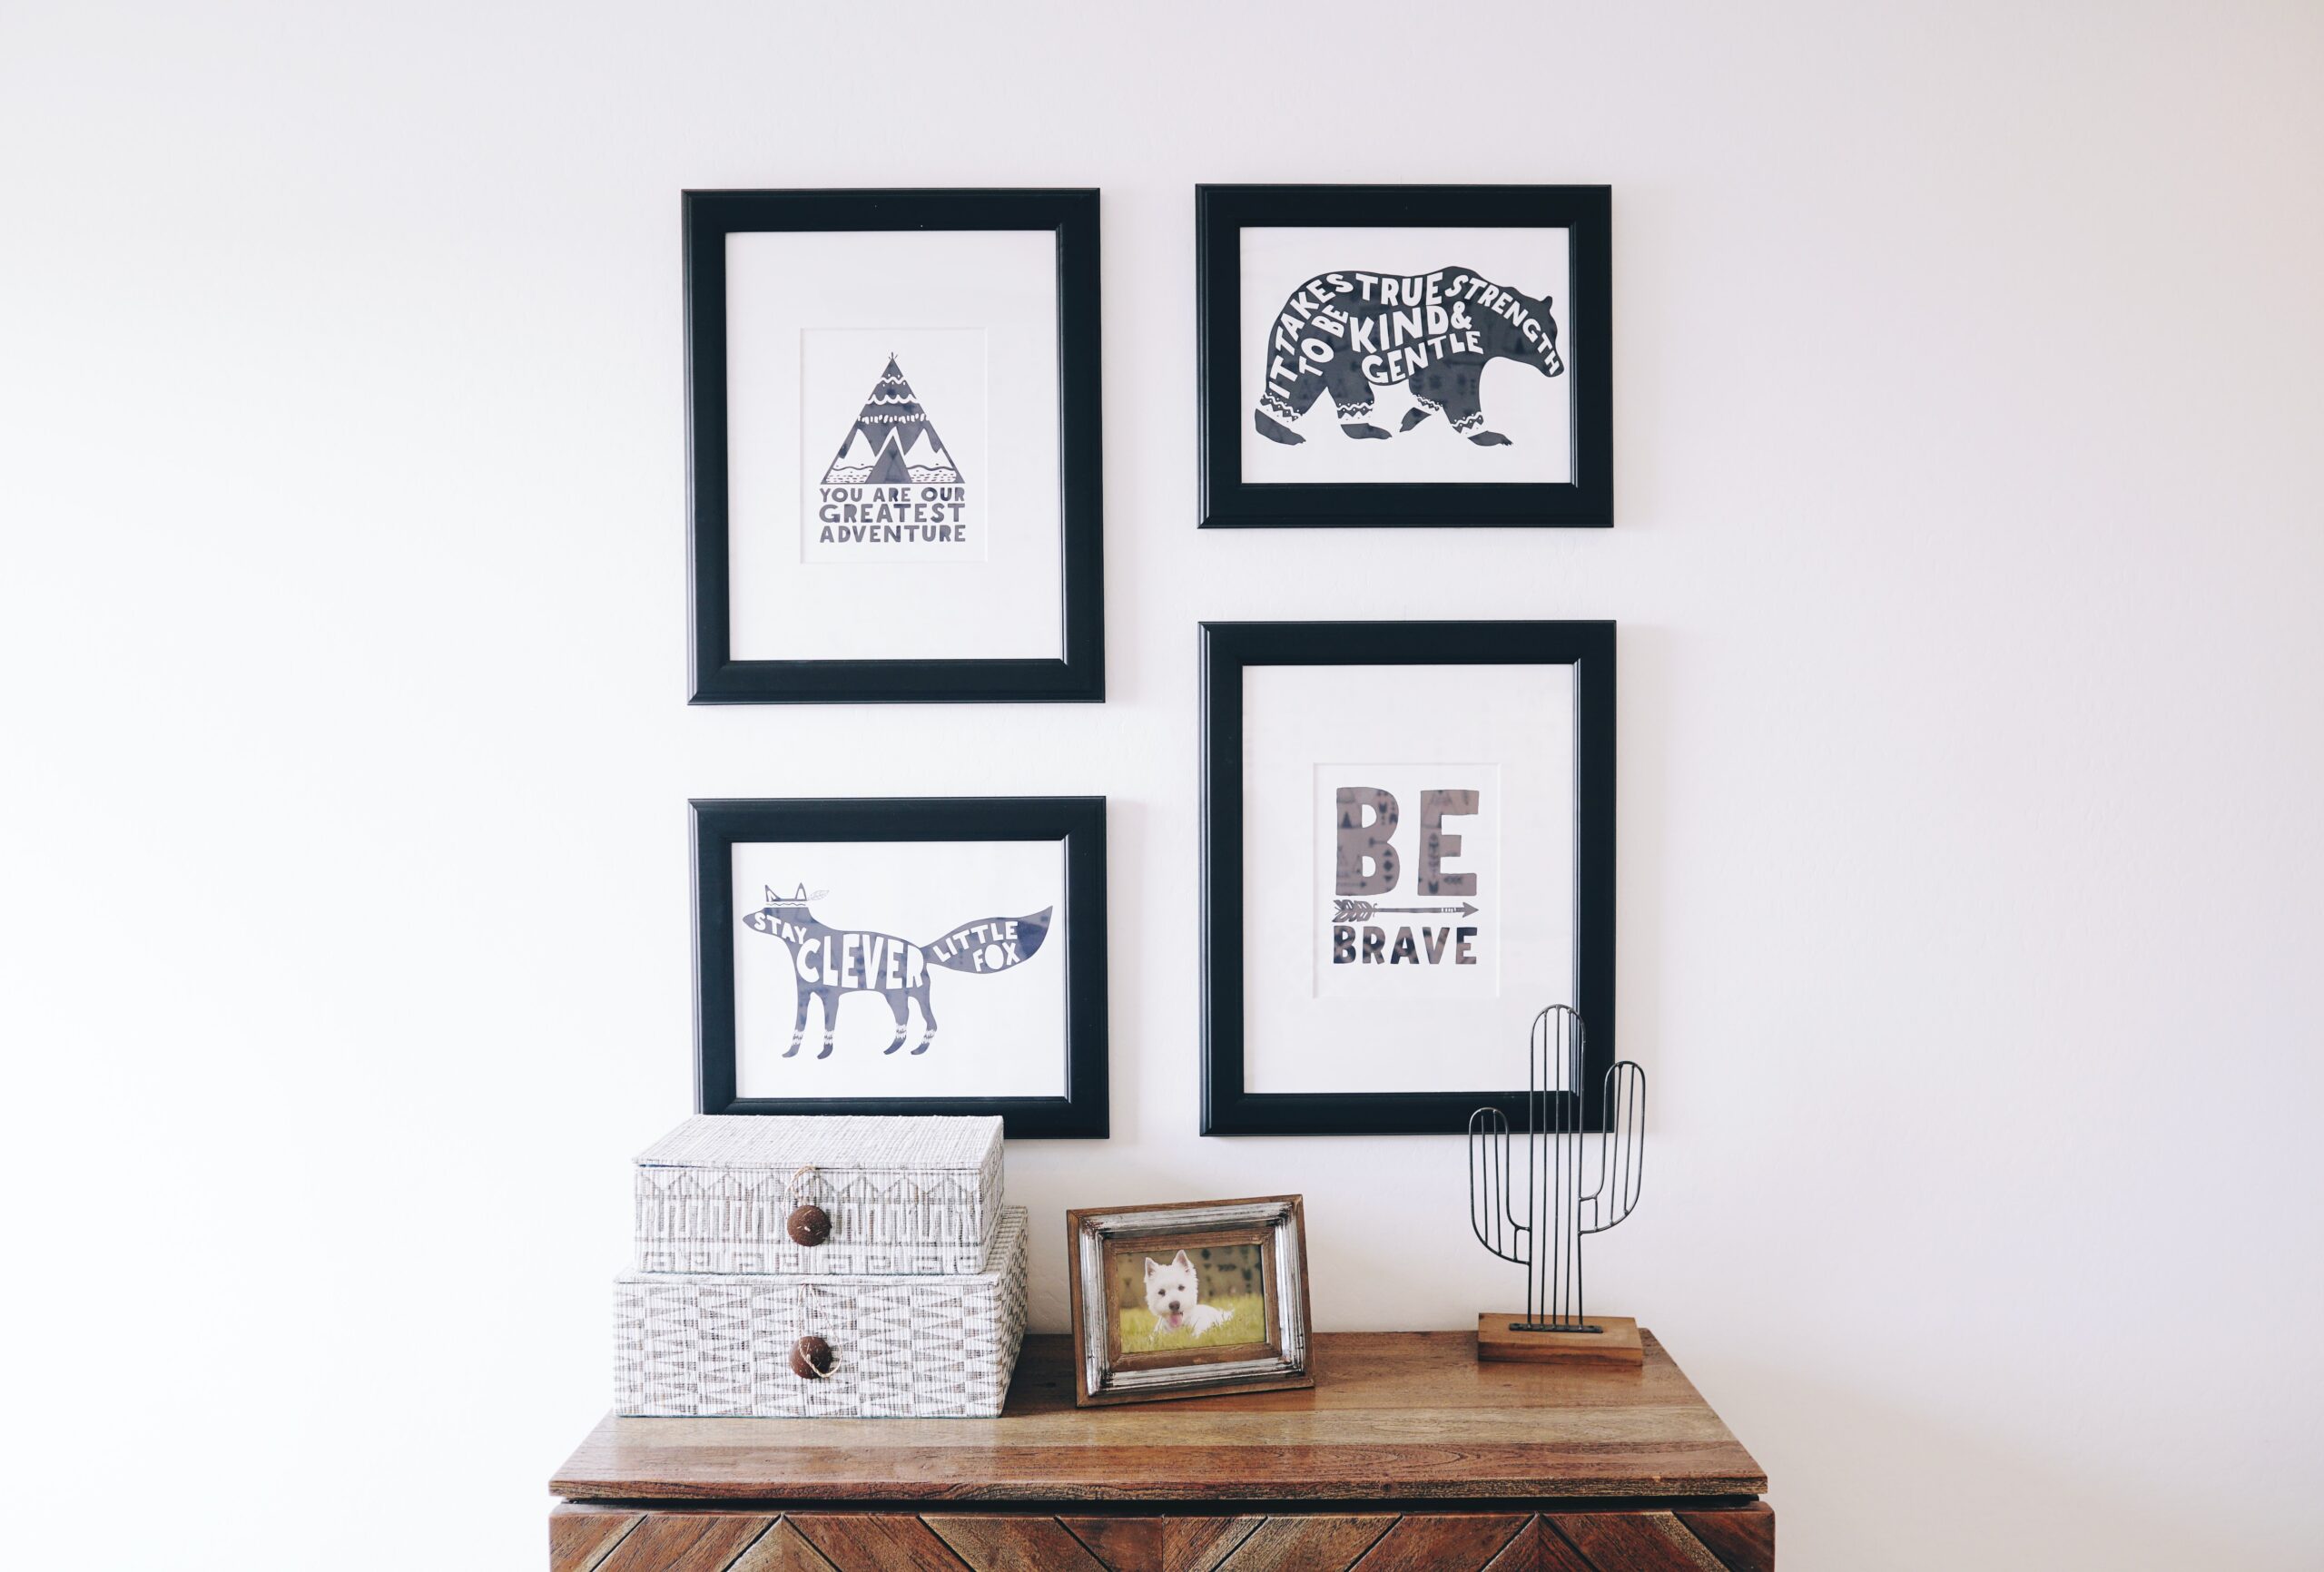 easy artwork on walls for decorating budgeting